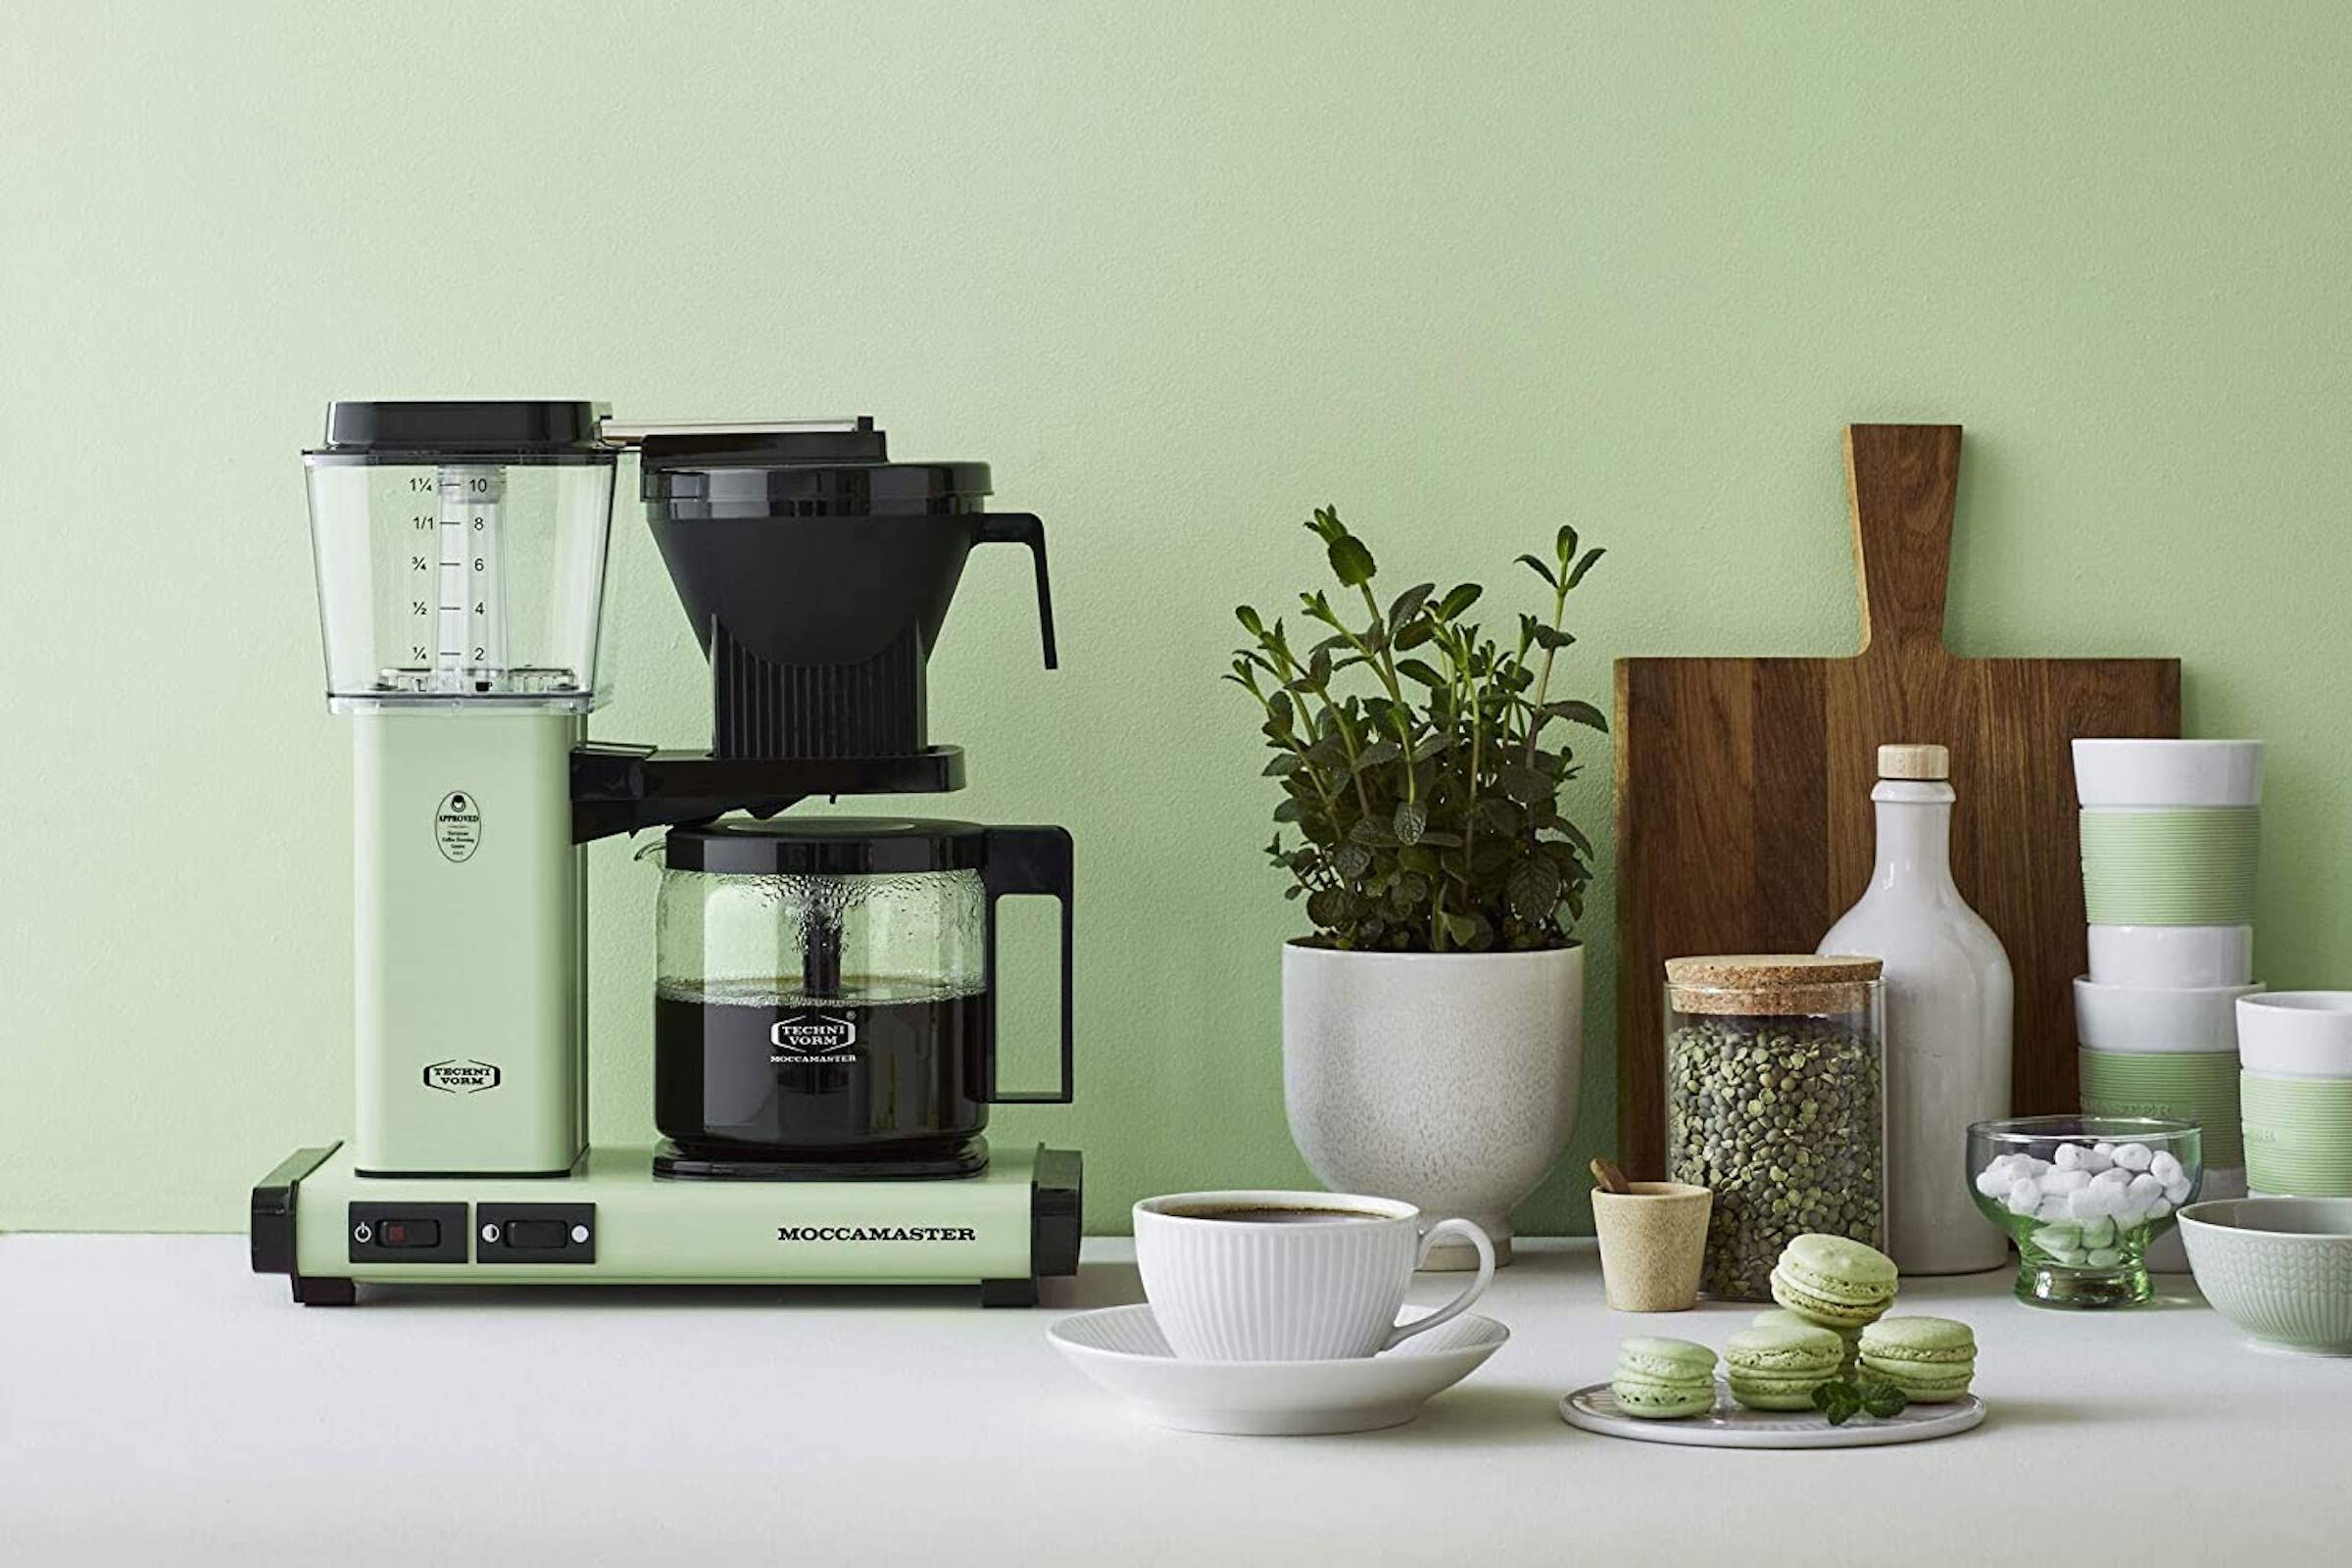 Lead image for the best coffee maker guide. Lifestyle image of an automatic coffee maker on a white kitchen counter against a pale green wall.